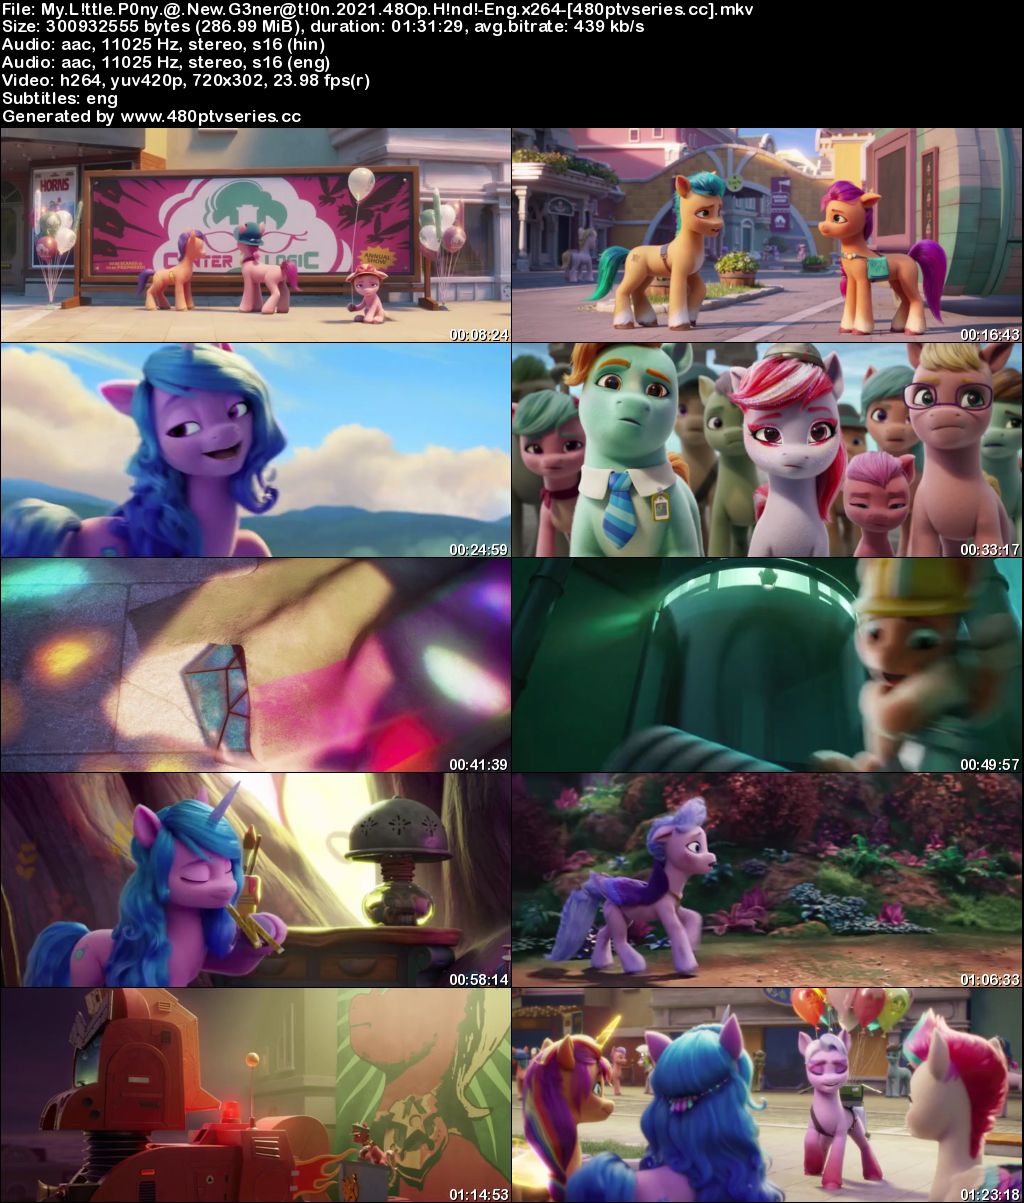 My Little Pony: A New Generation (2021) 300MB Full Hindi Dual Audio Movie Download 480p Web-DL Free Watch Online Full Movie Download Worldfree4u 9xmovies